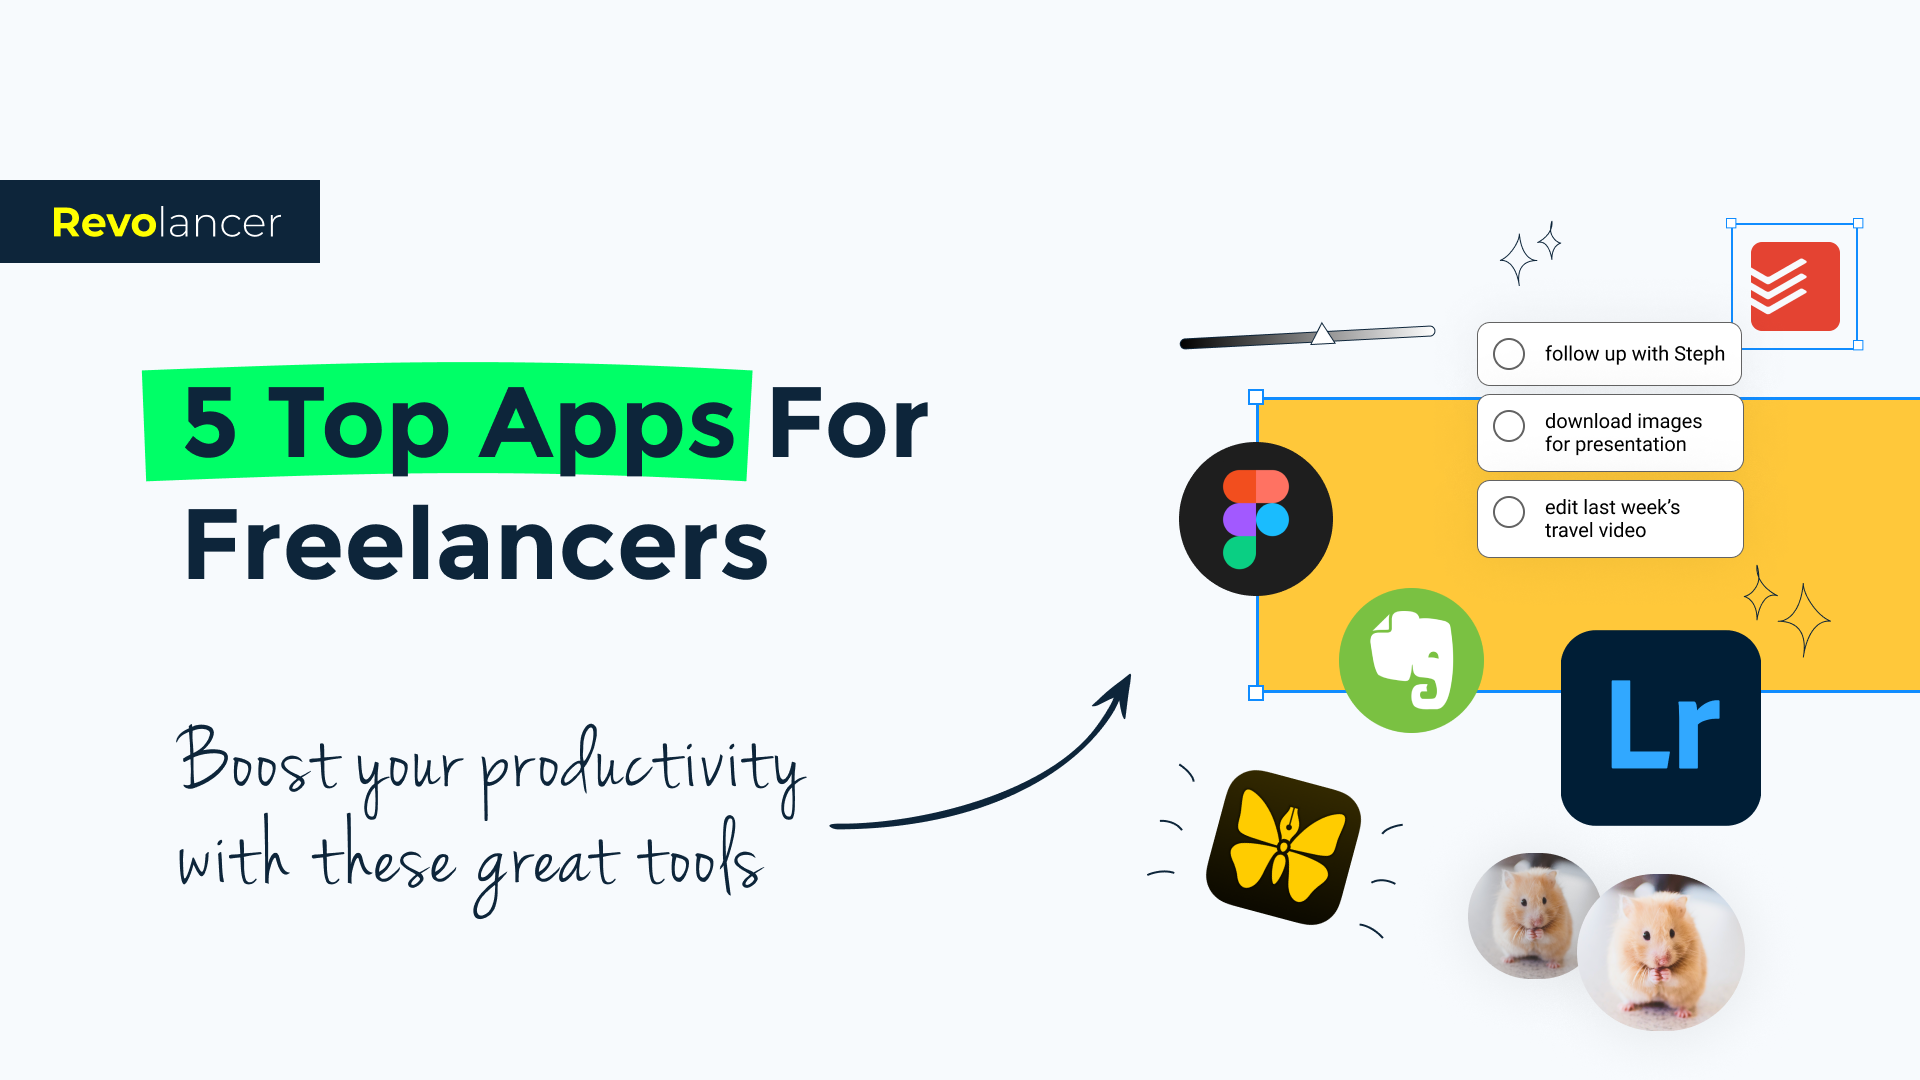 5 Top Apps for Freelancers